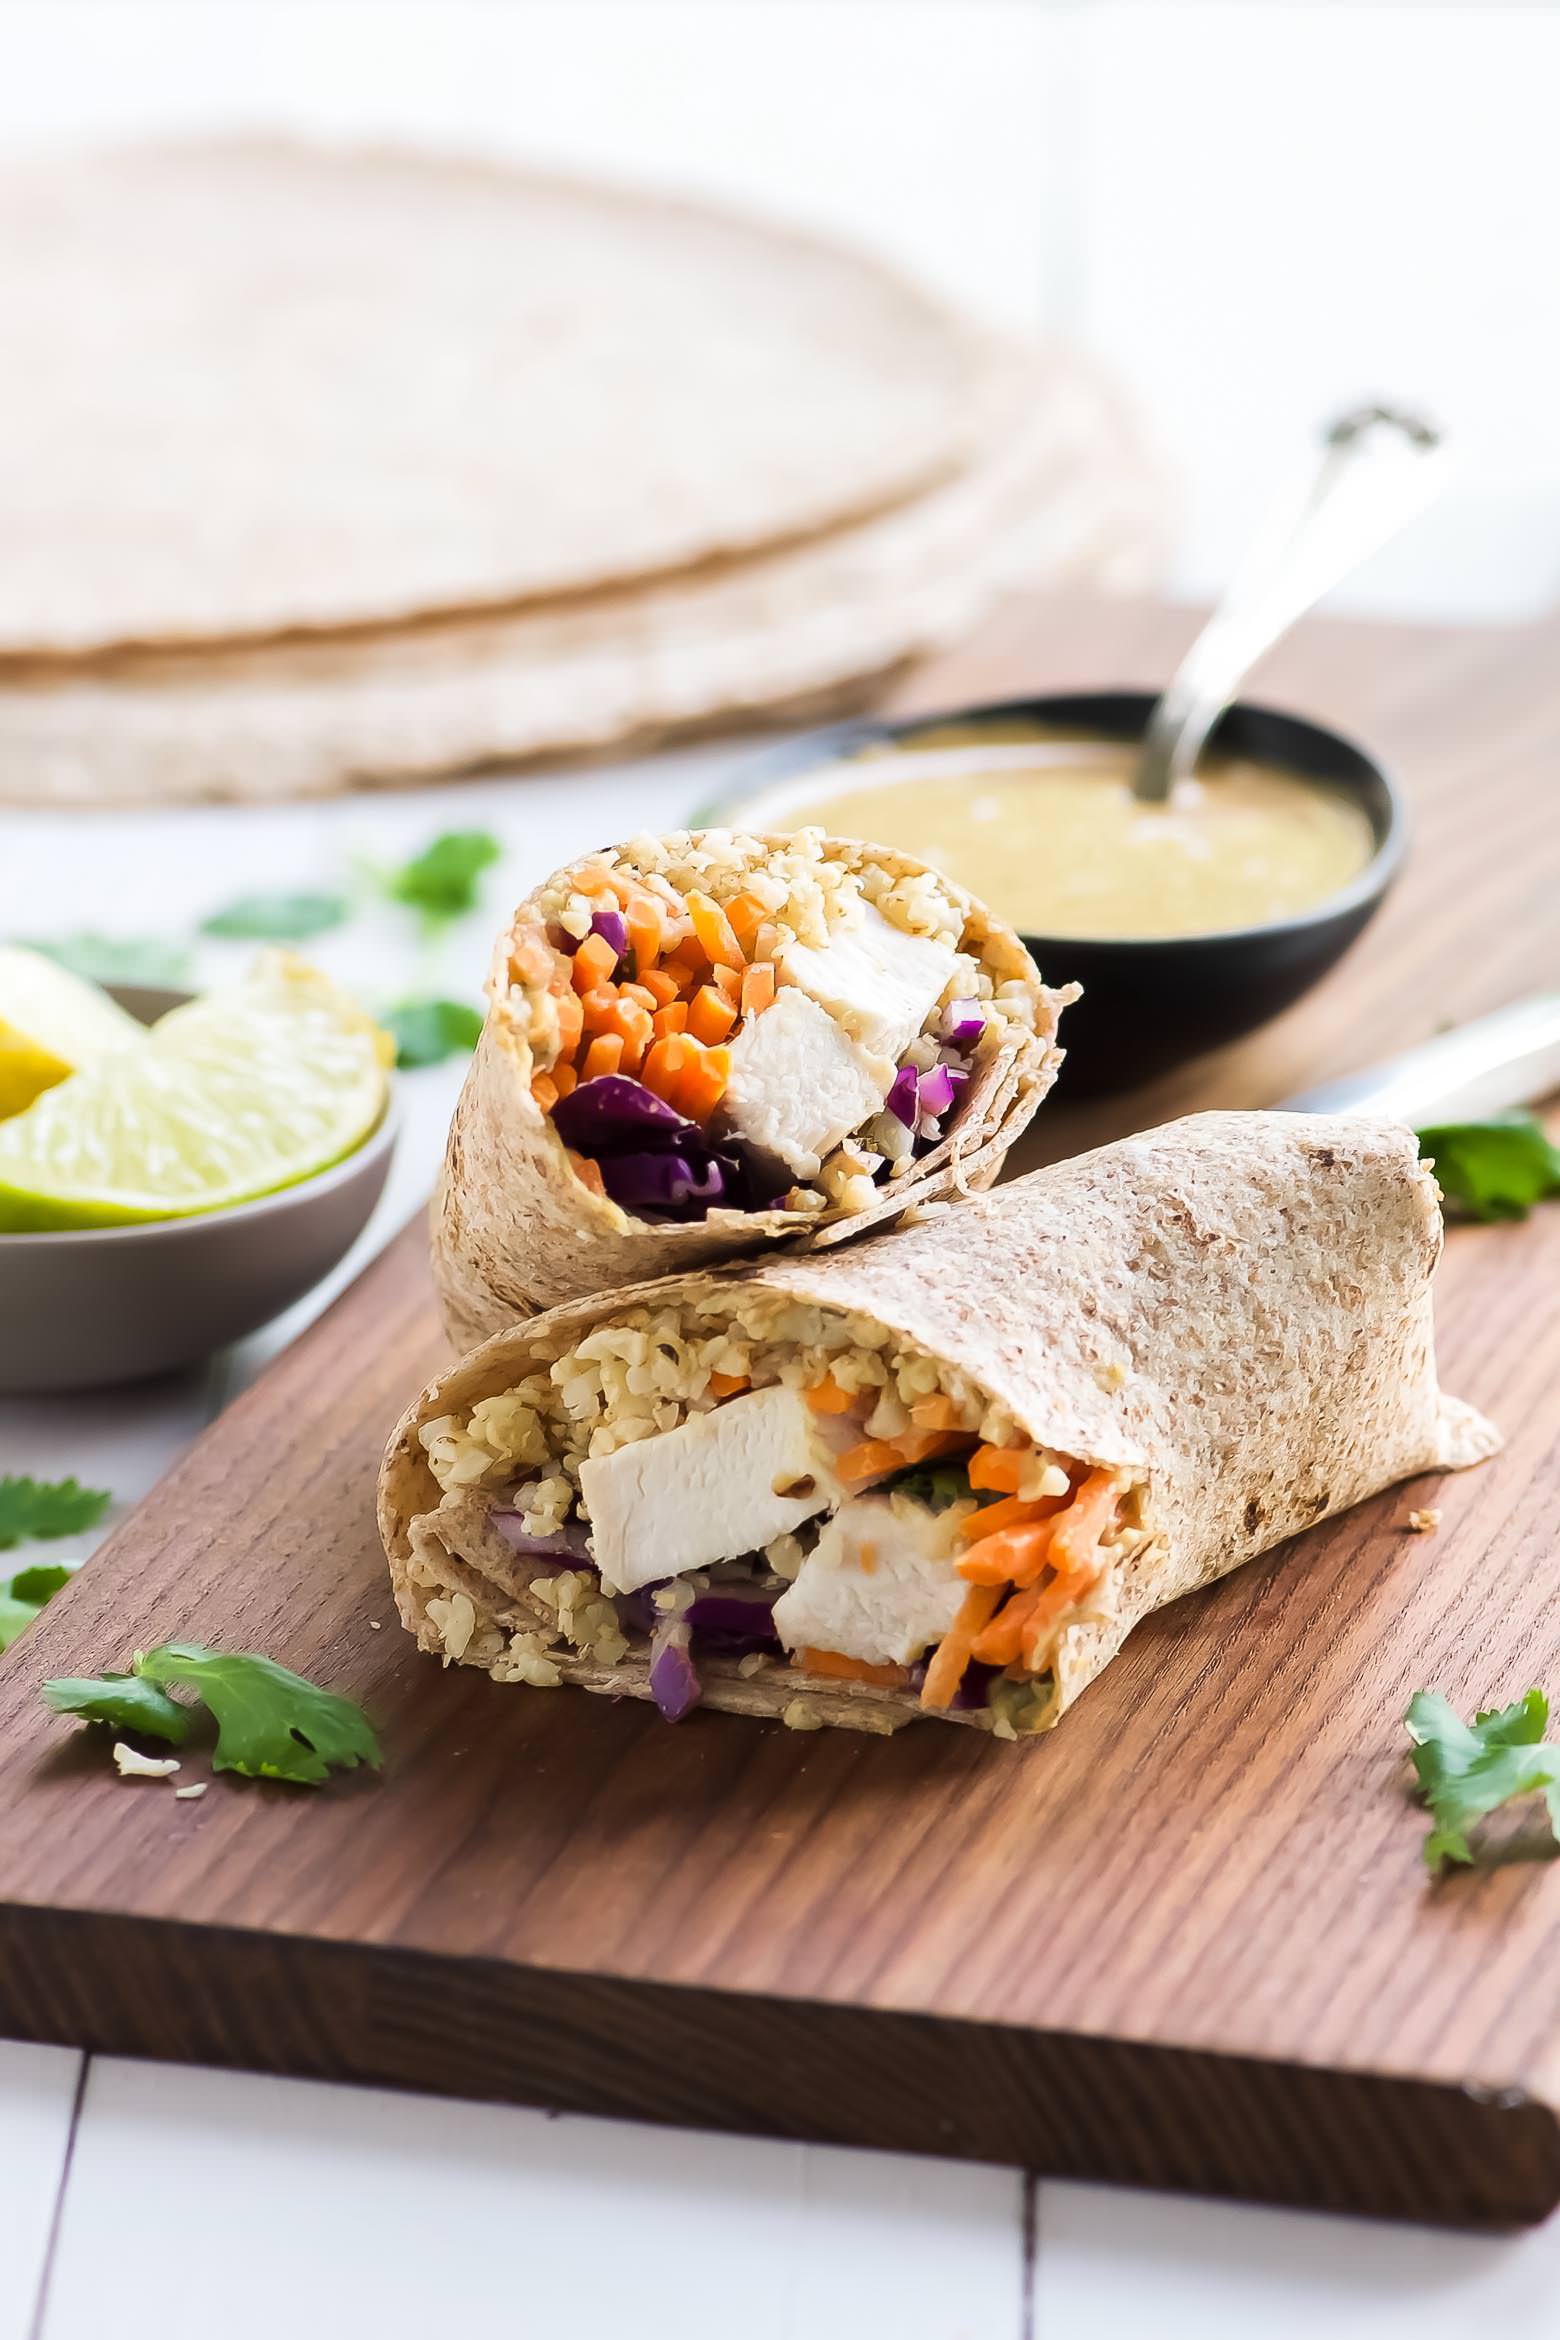 Thai Style Peanut Chicken Cauliflower Rice Wraps are a Starbucks copycat but with a heavy dose of veggies! Chicken, carrots, cabbage and crispy cauliflower rice all wrapped up and served with an addicting Peanut Coconut Sauce!